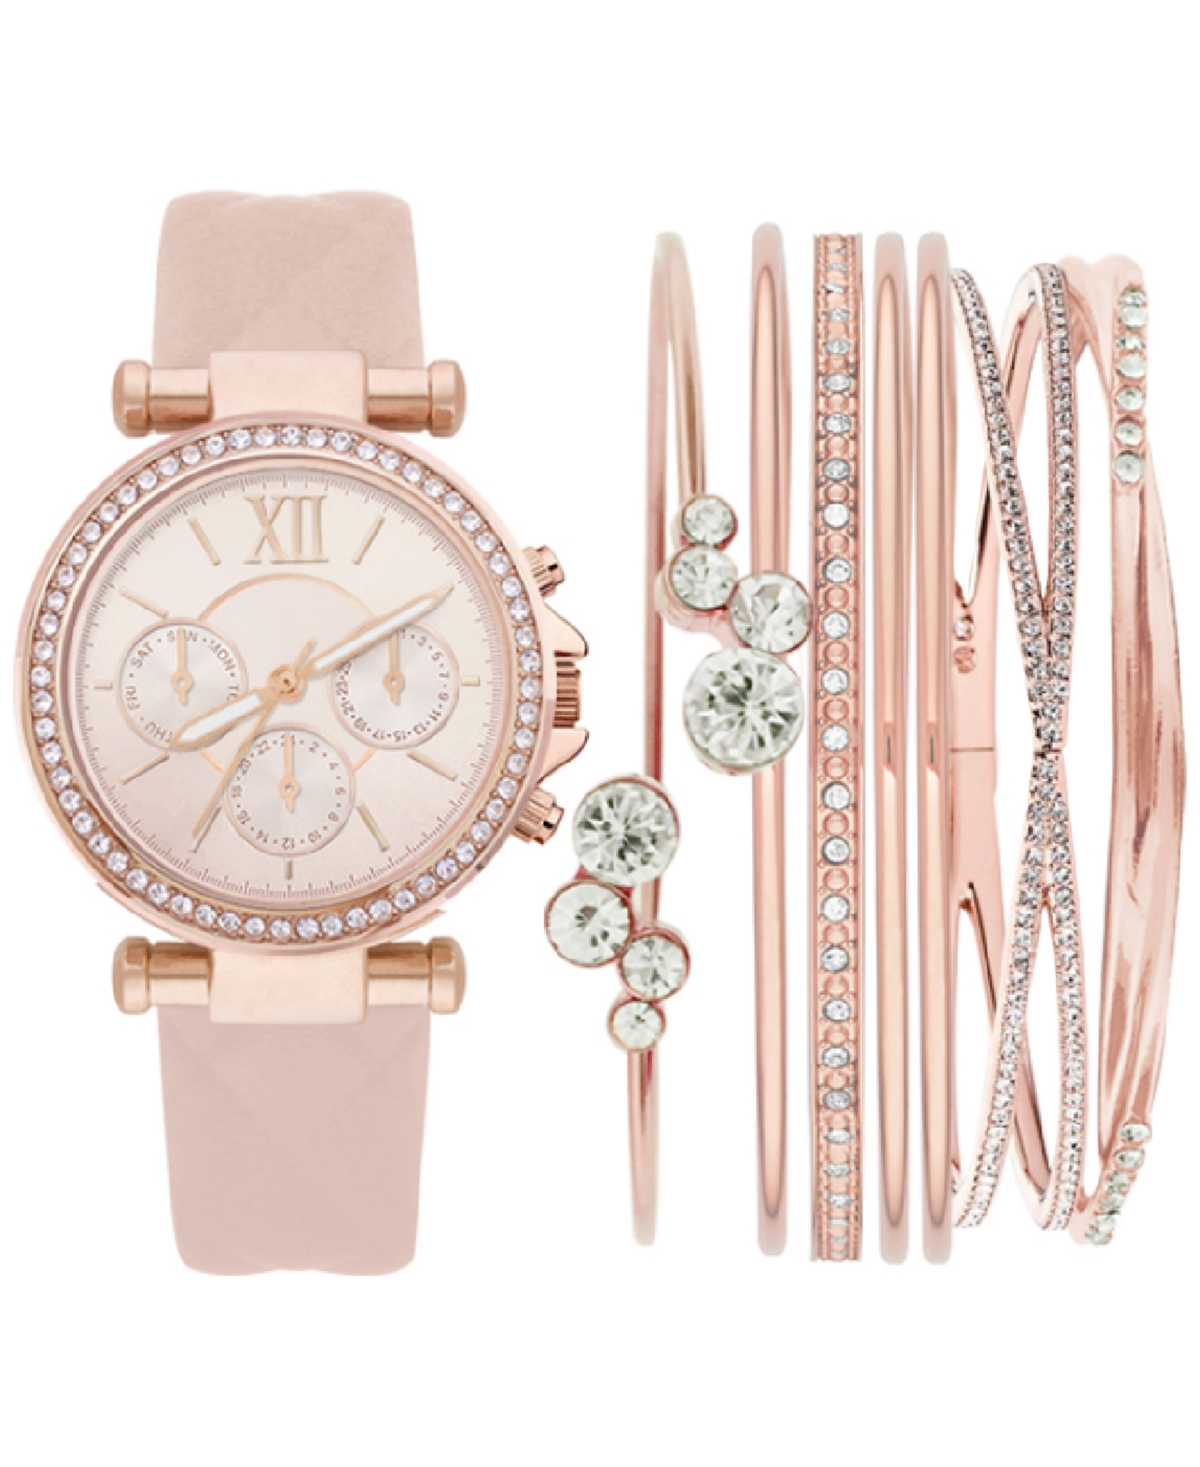 Jessica Carlyle Women's Blush Leather Strap Watch 36mm Gift Set